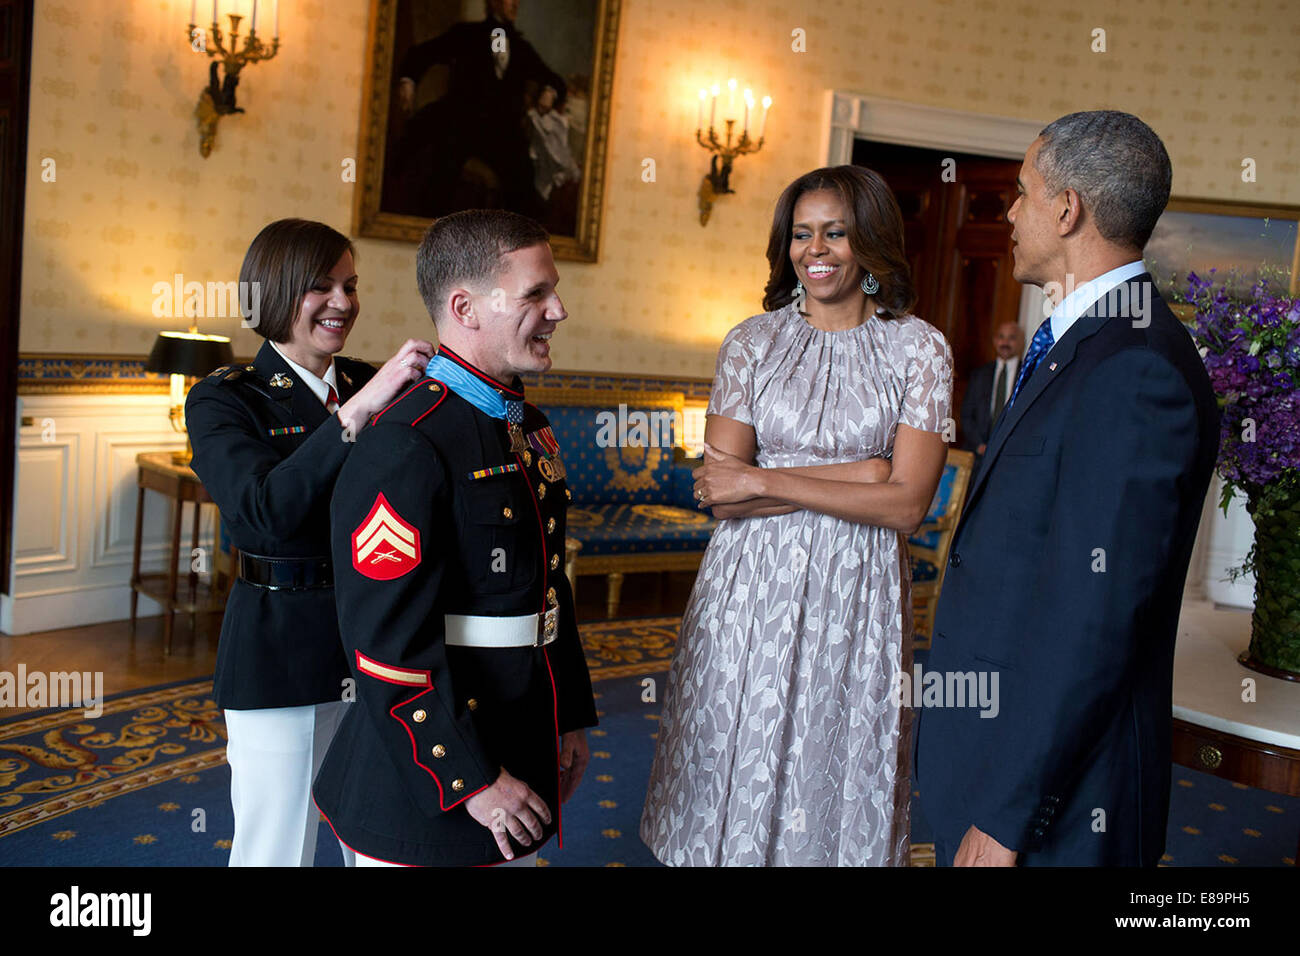 President Barack Obama and First Lady Michelle Obama talk with Corporal William 'Kyle' Carpenter, U.S. Marine Corps (Ret.) in the Blue Room following a Medal of Honor ceremony in the East Room of the White House, June 19, 2014. Cpl. Carpenter received the Stock Photo